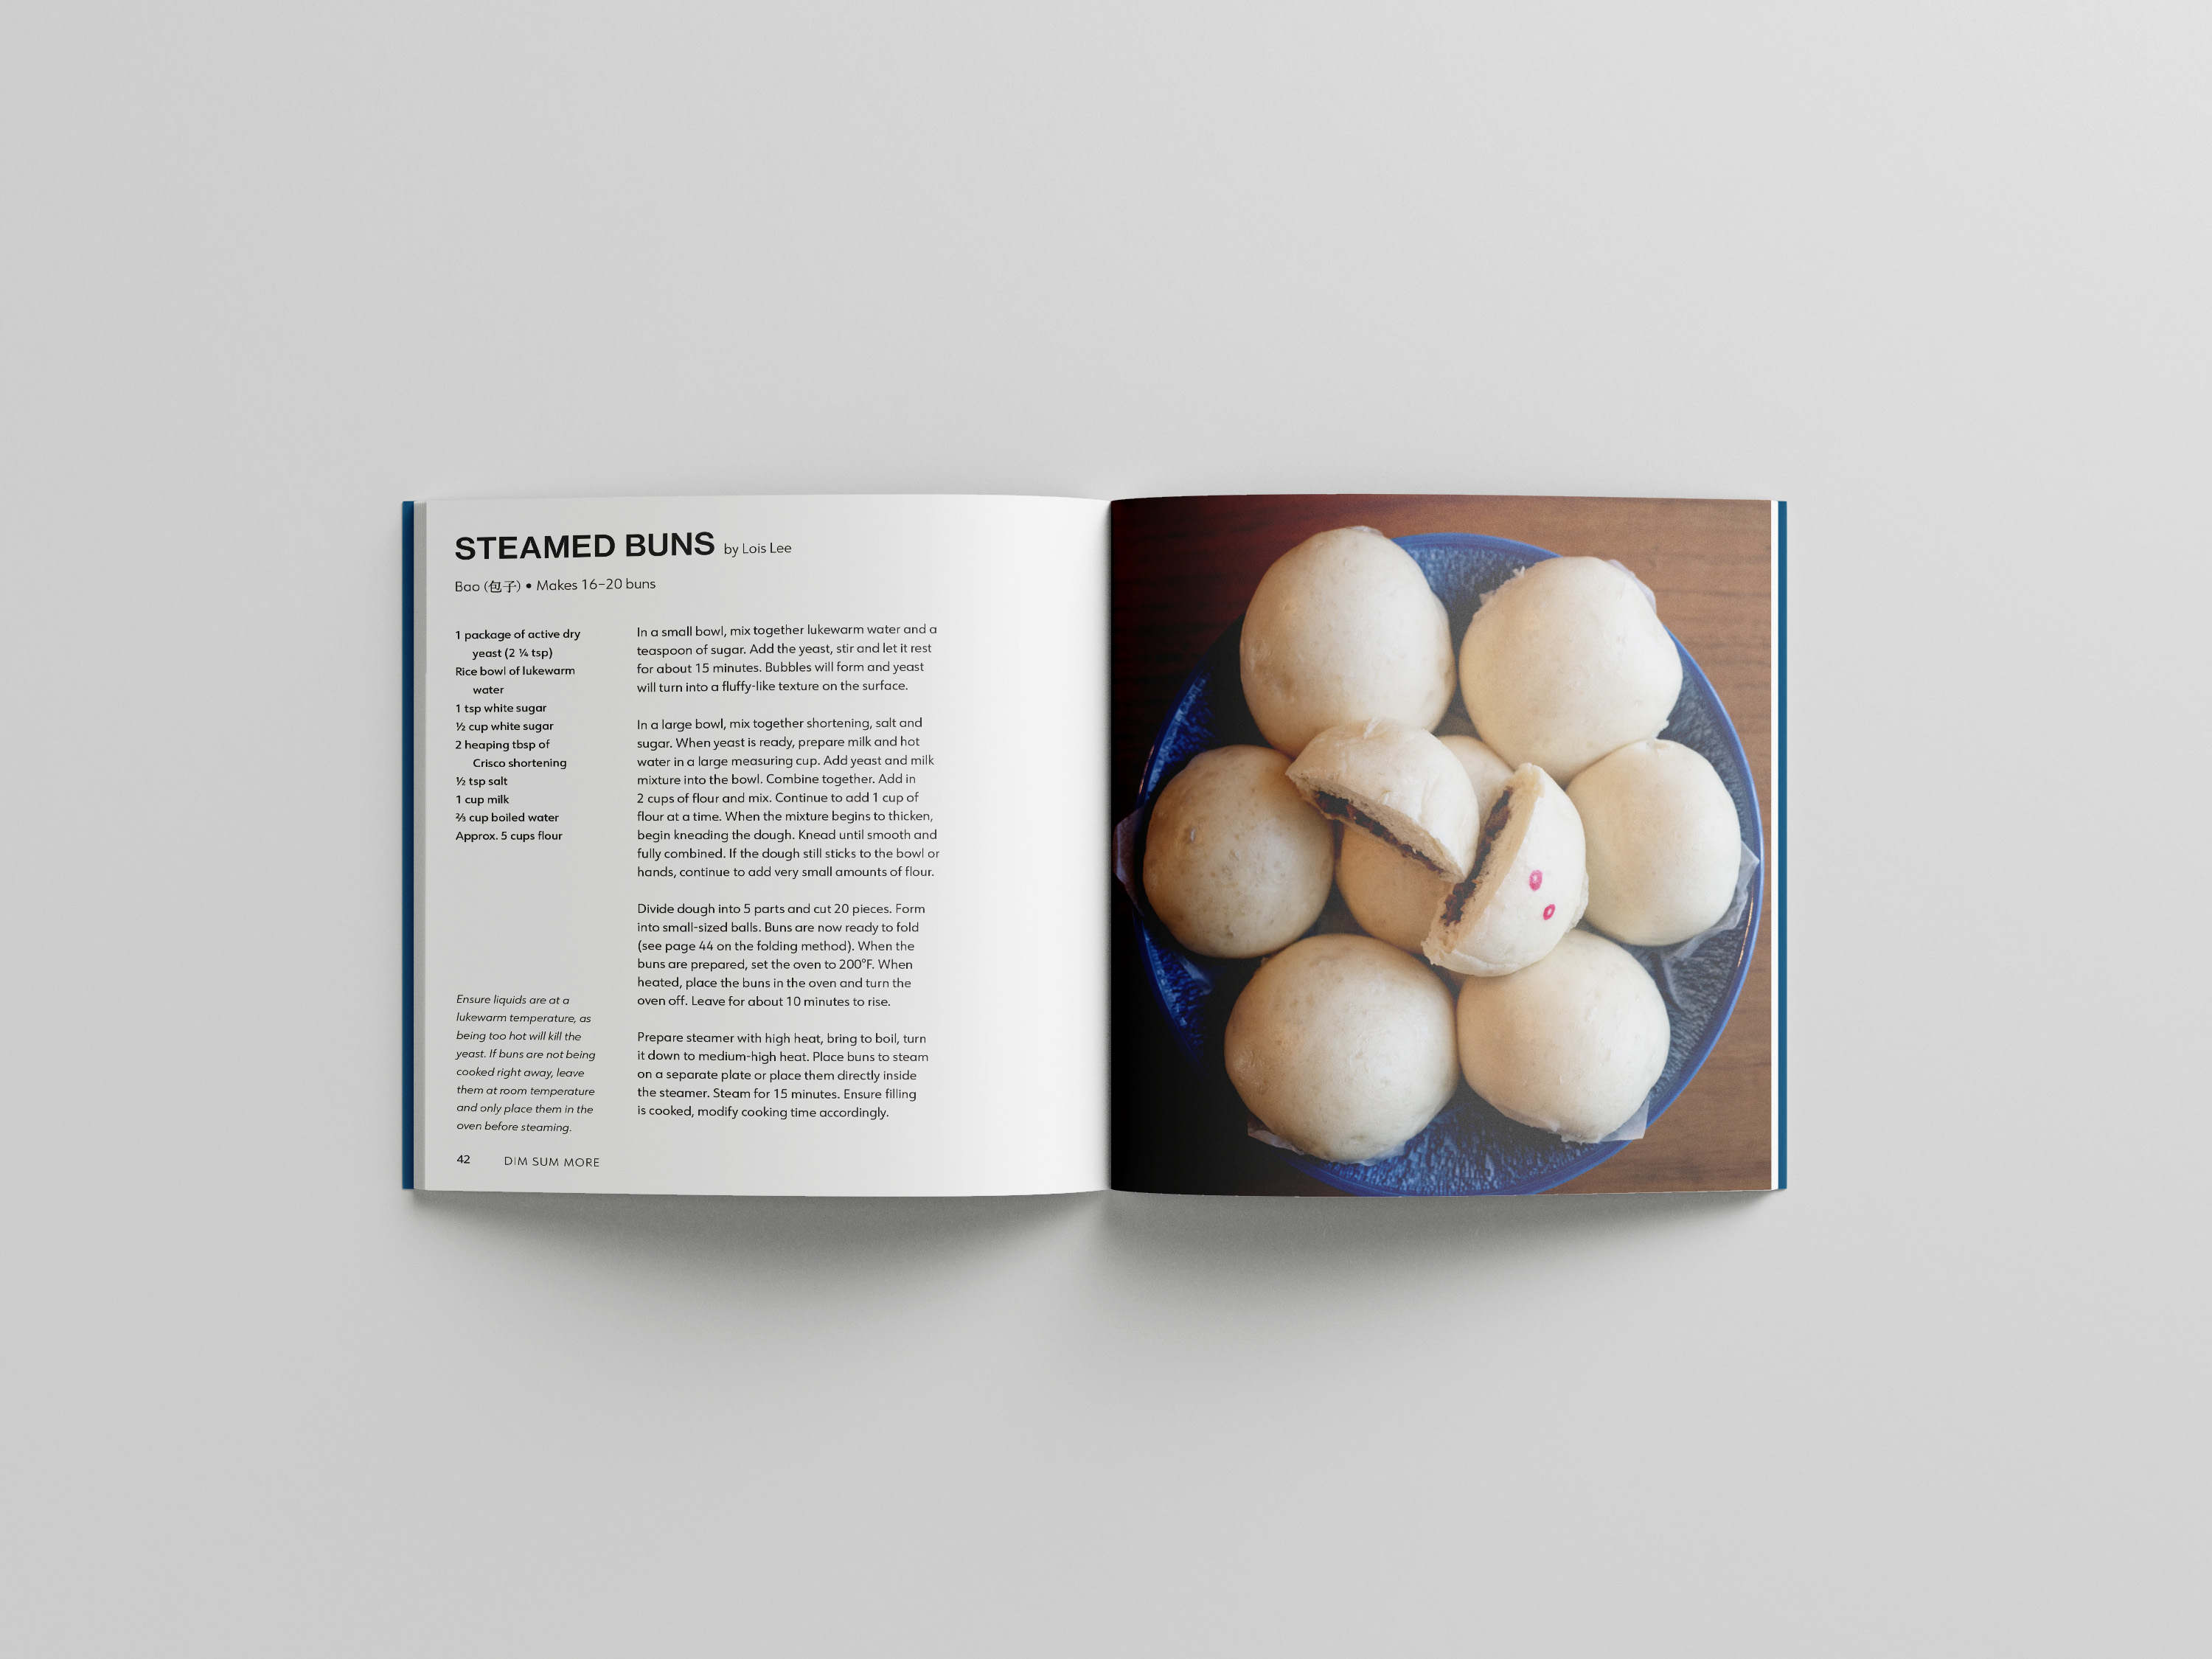 Recipe on making Steamed Buns.